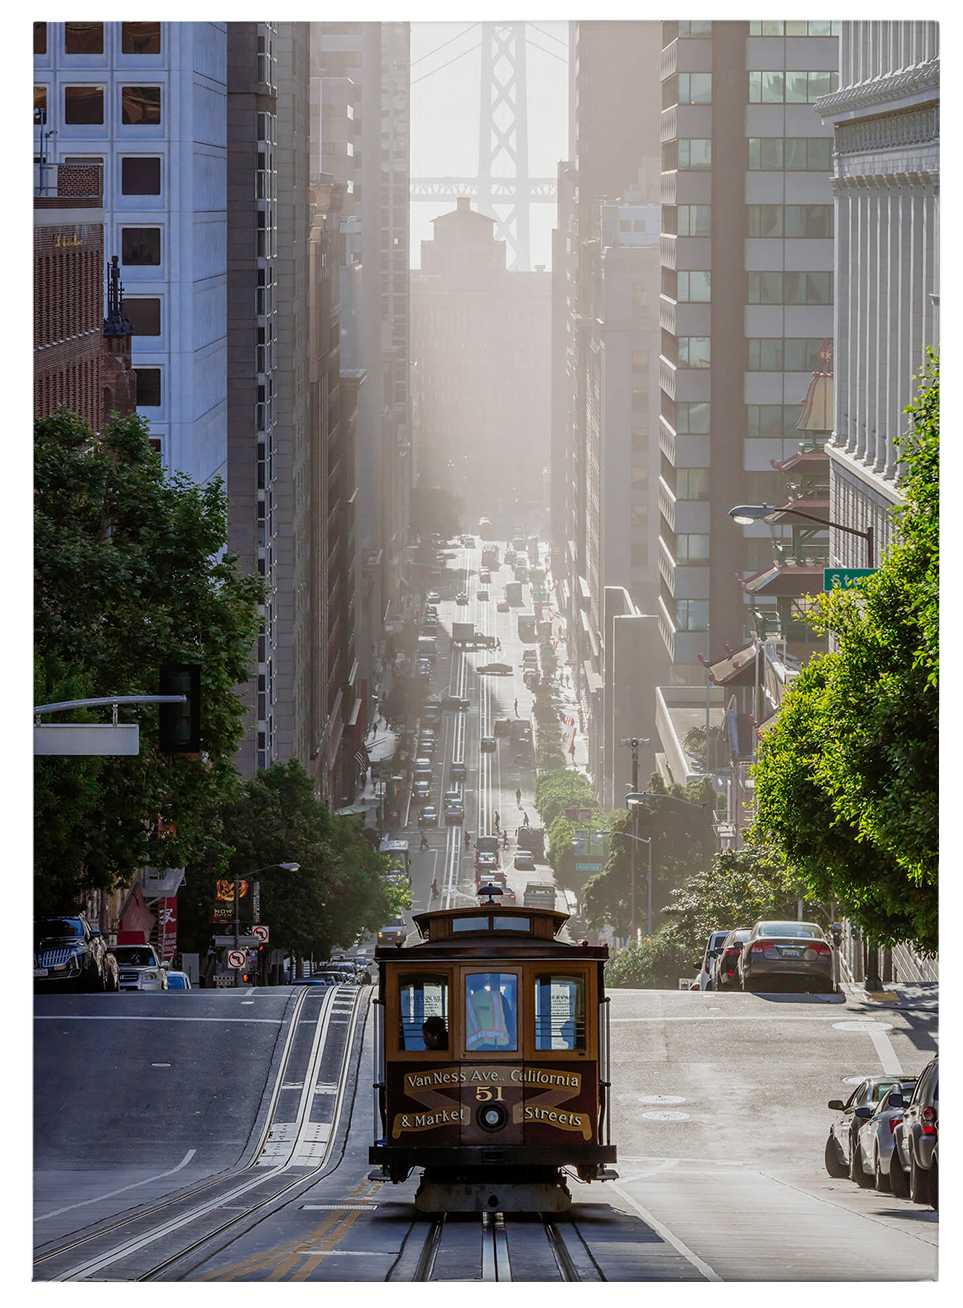             Canvas print San Francisco cable car, photo by Colombo
        